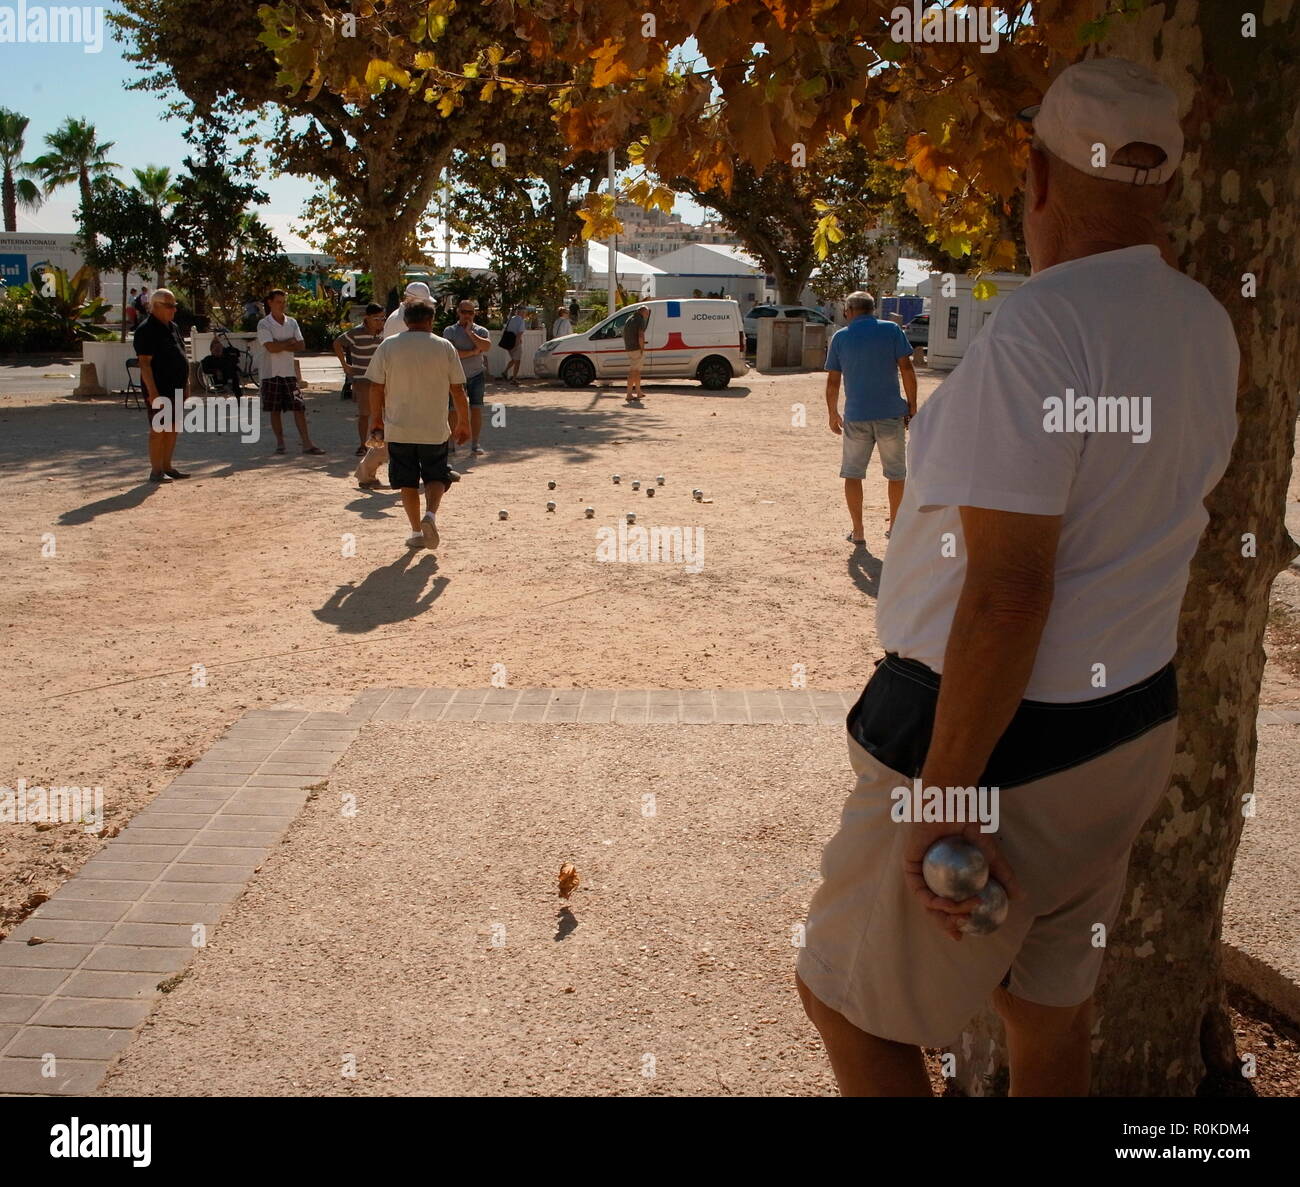 AJAXNETPHOTO.  CANNES, FRANCE. - A GAME OF BOULE (PETANQUE) IN PROGRESS IN PUBLIC GARDENS NEAR THE OLD PORT. PHOTO:JONATHAN EASTLAND/AJAX REF:GXR180310 654 Stock Photo